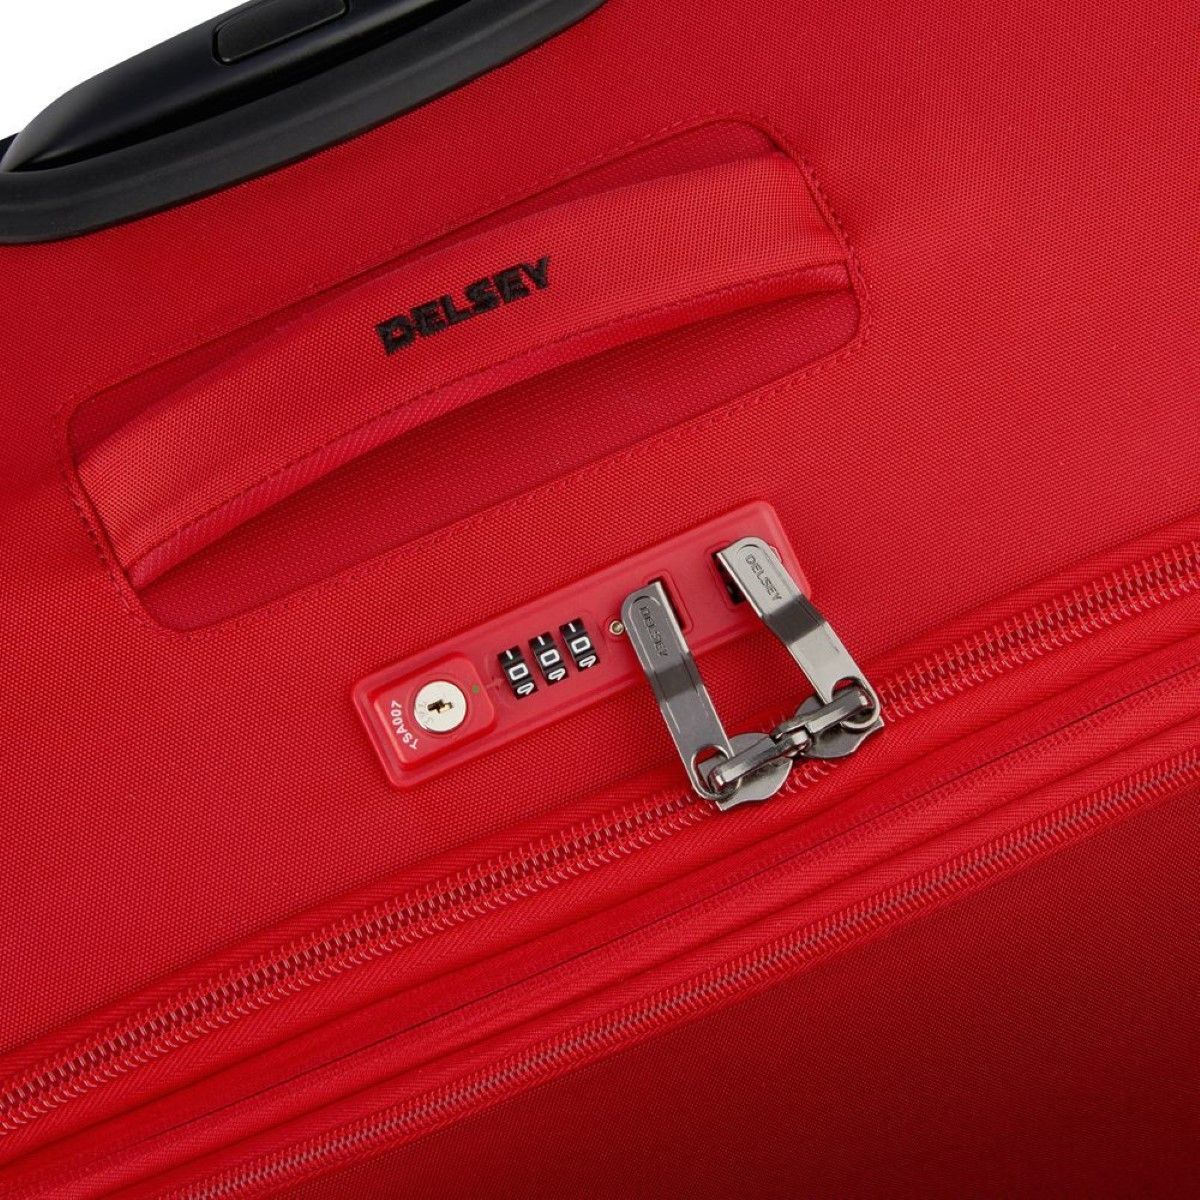 Expandable Large Trolley Mercure 78 cm Delsey, spacious and light softcase luggage with four wheels, double tube telescopic handle, zipped compartment, TSA combination lock, front pocket, and side handles.